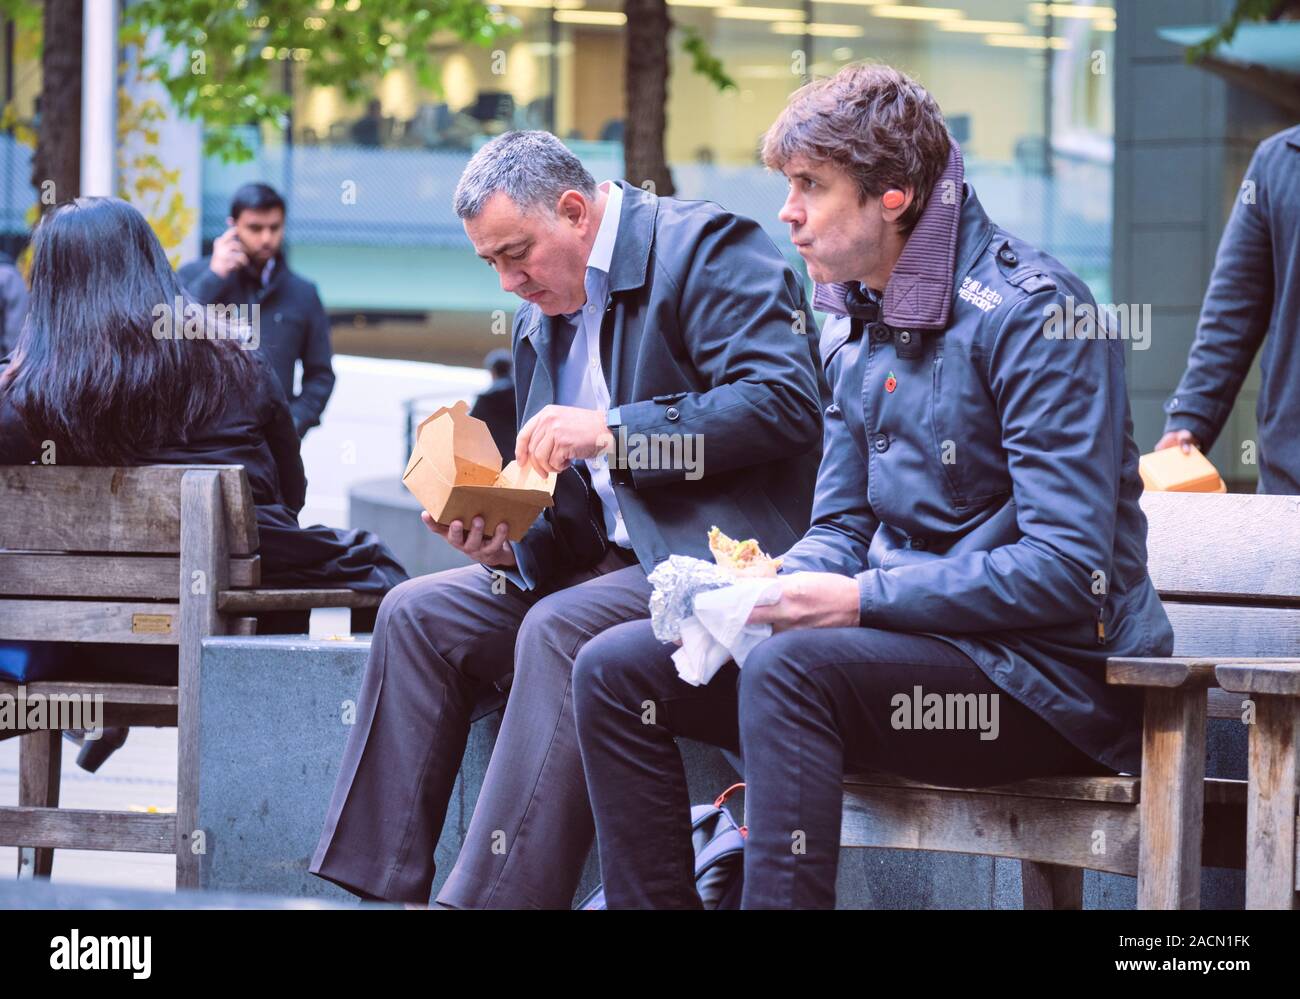 Two male city centre workers eating lunch outside on square bench wearing warm clothing. London City, UK Stock Photo